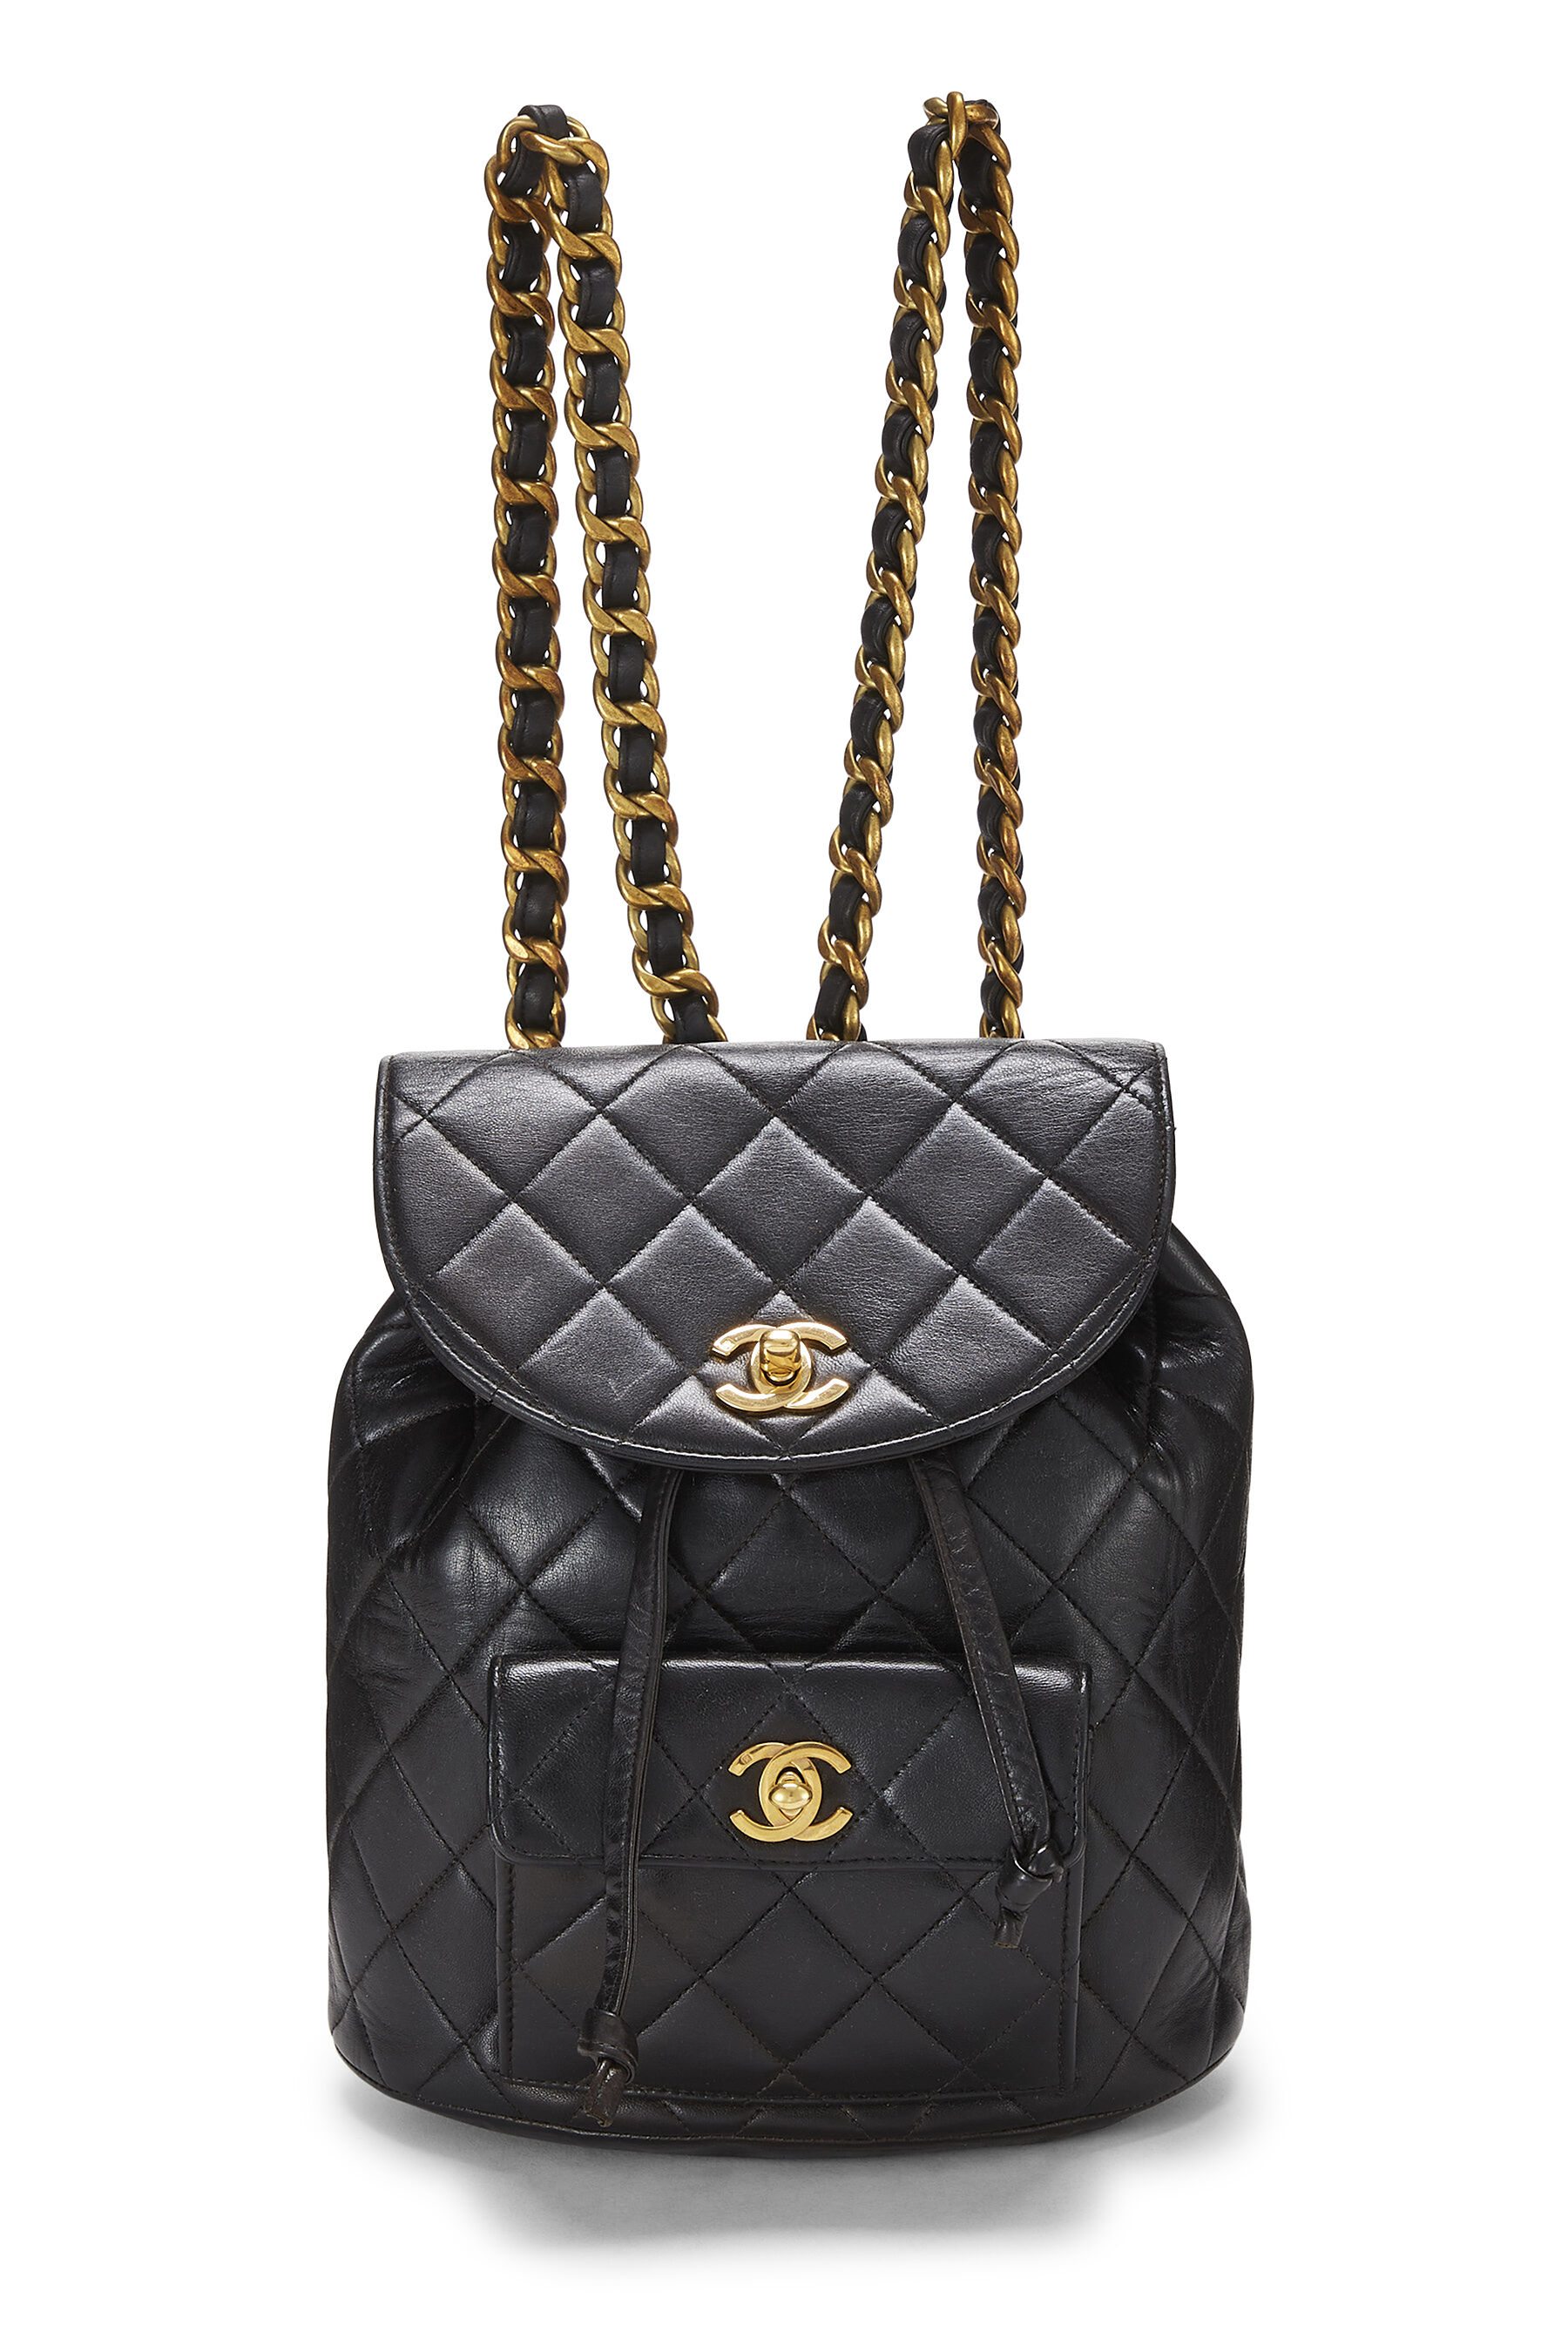 Chanel - Black Quilted Lambskin 'CC' Classic Backpack Medium